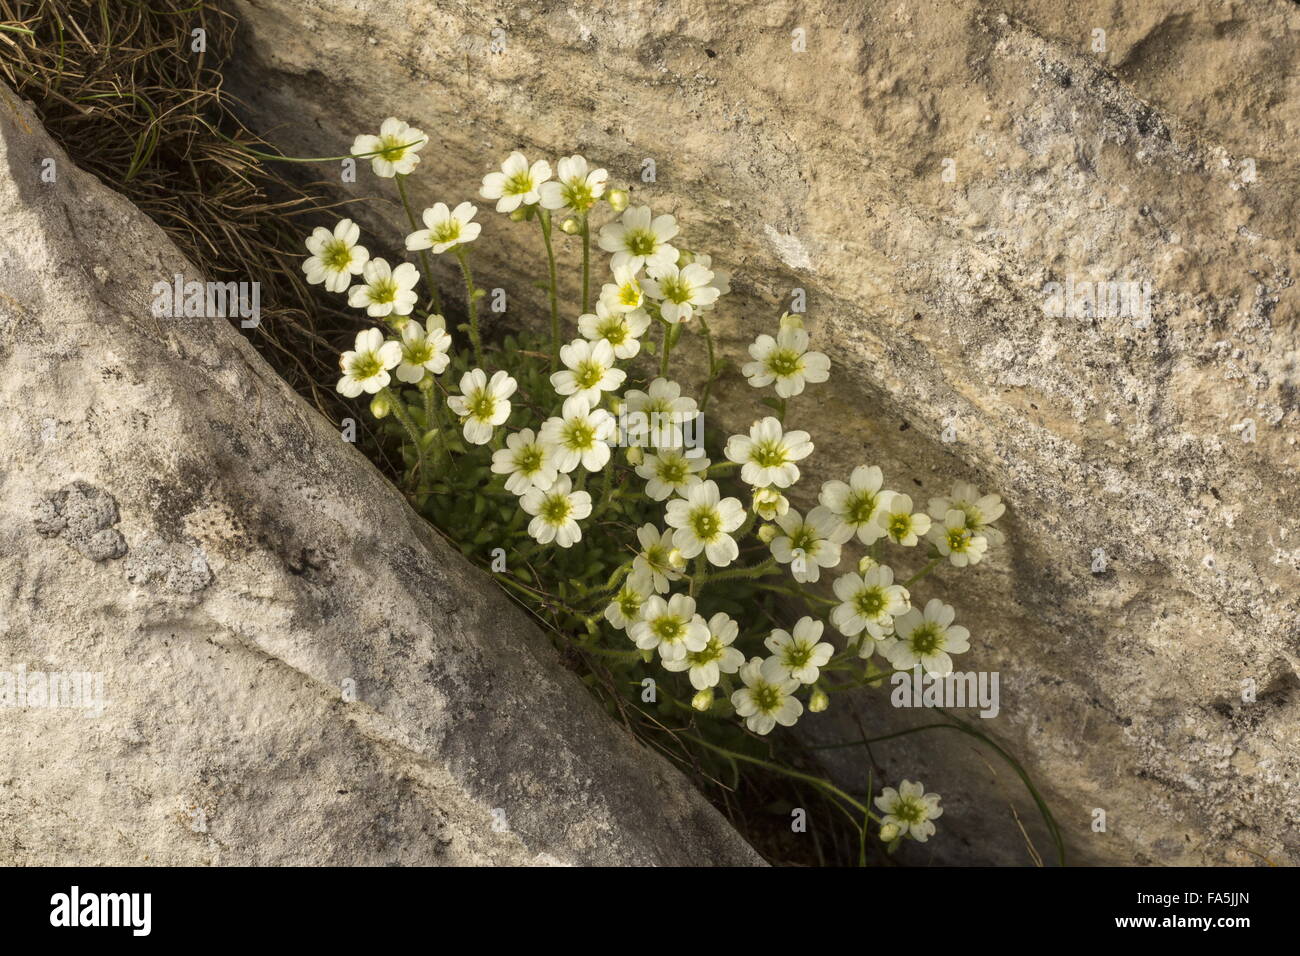 A mossy saxifrage, Saxifraga muscoides on limestone in the Vanoise National Park. France Stock Photo